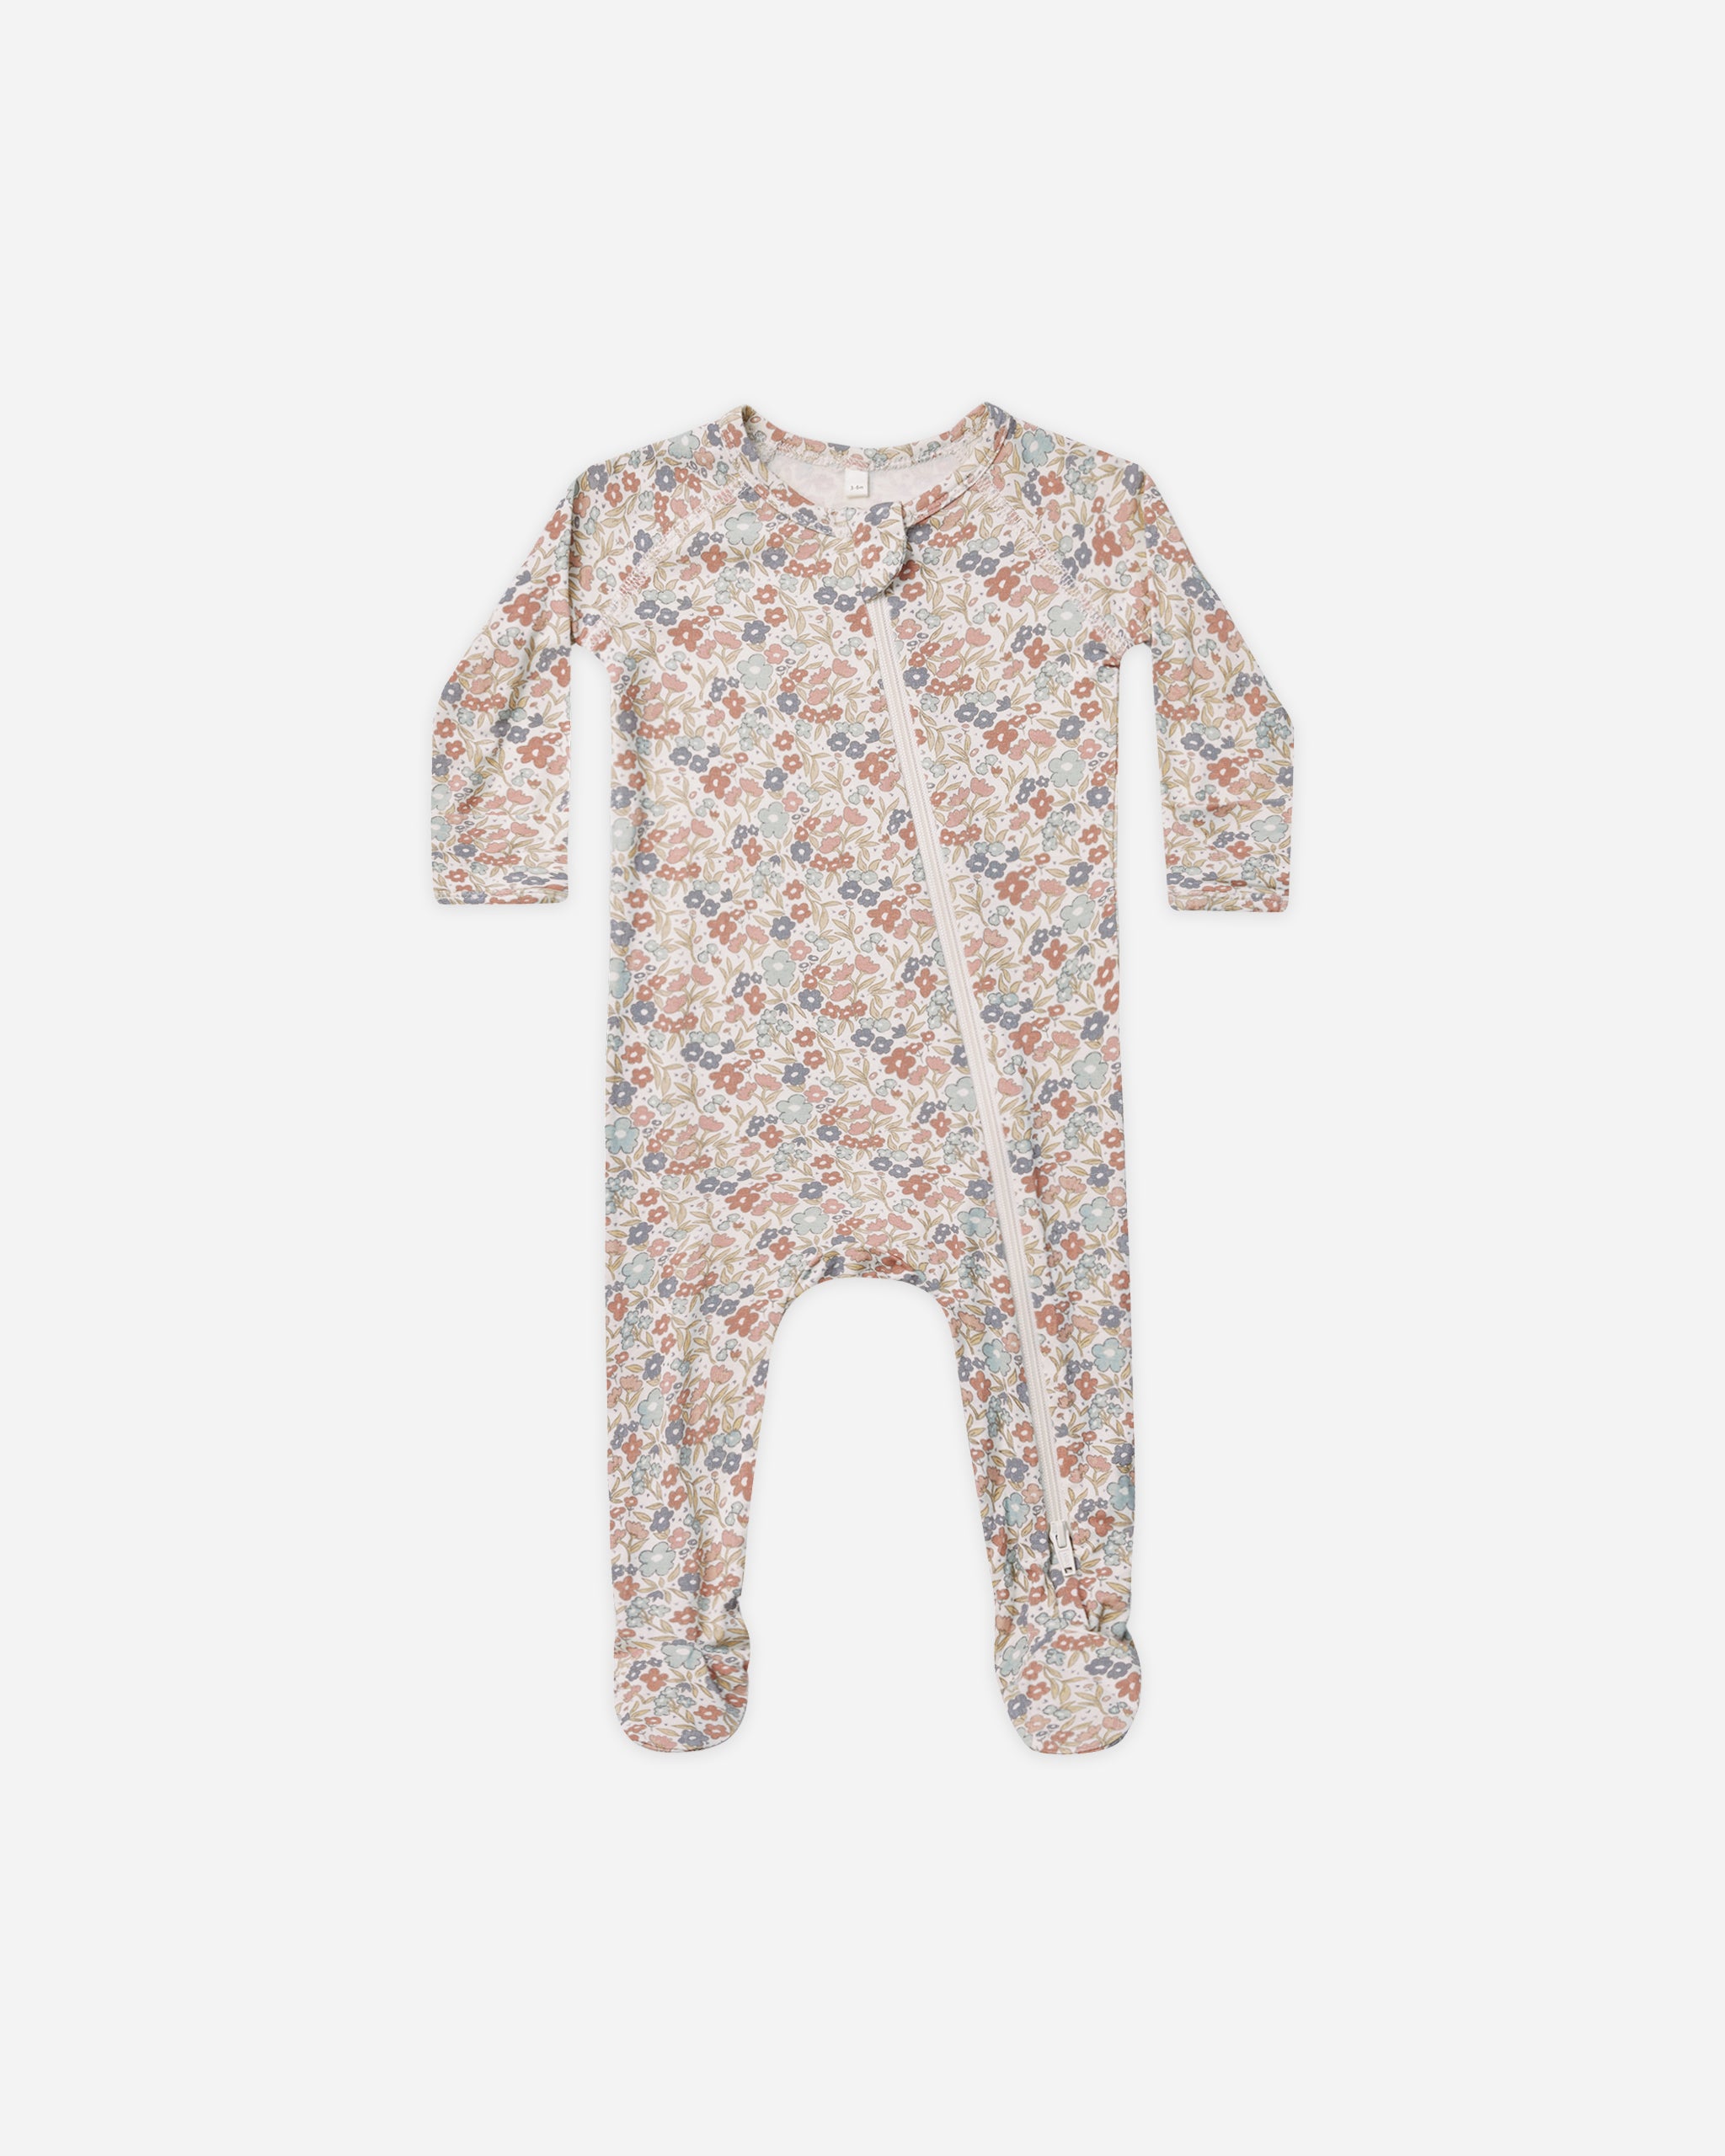 Bamboo Zip Footie || Bloom - Rylee + Cru | Kids Clothes | Trendy Baby Clothes | Modern Infant Outfits |